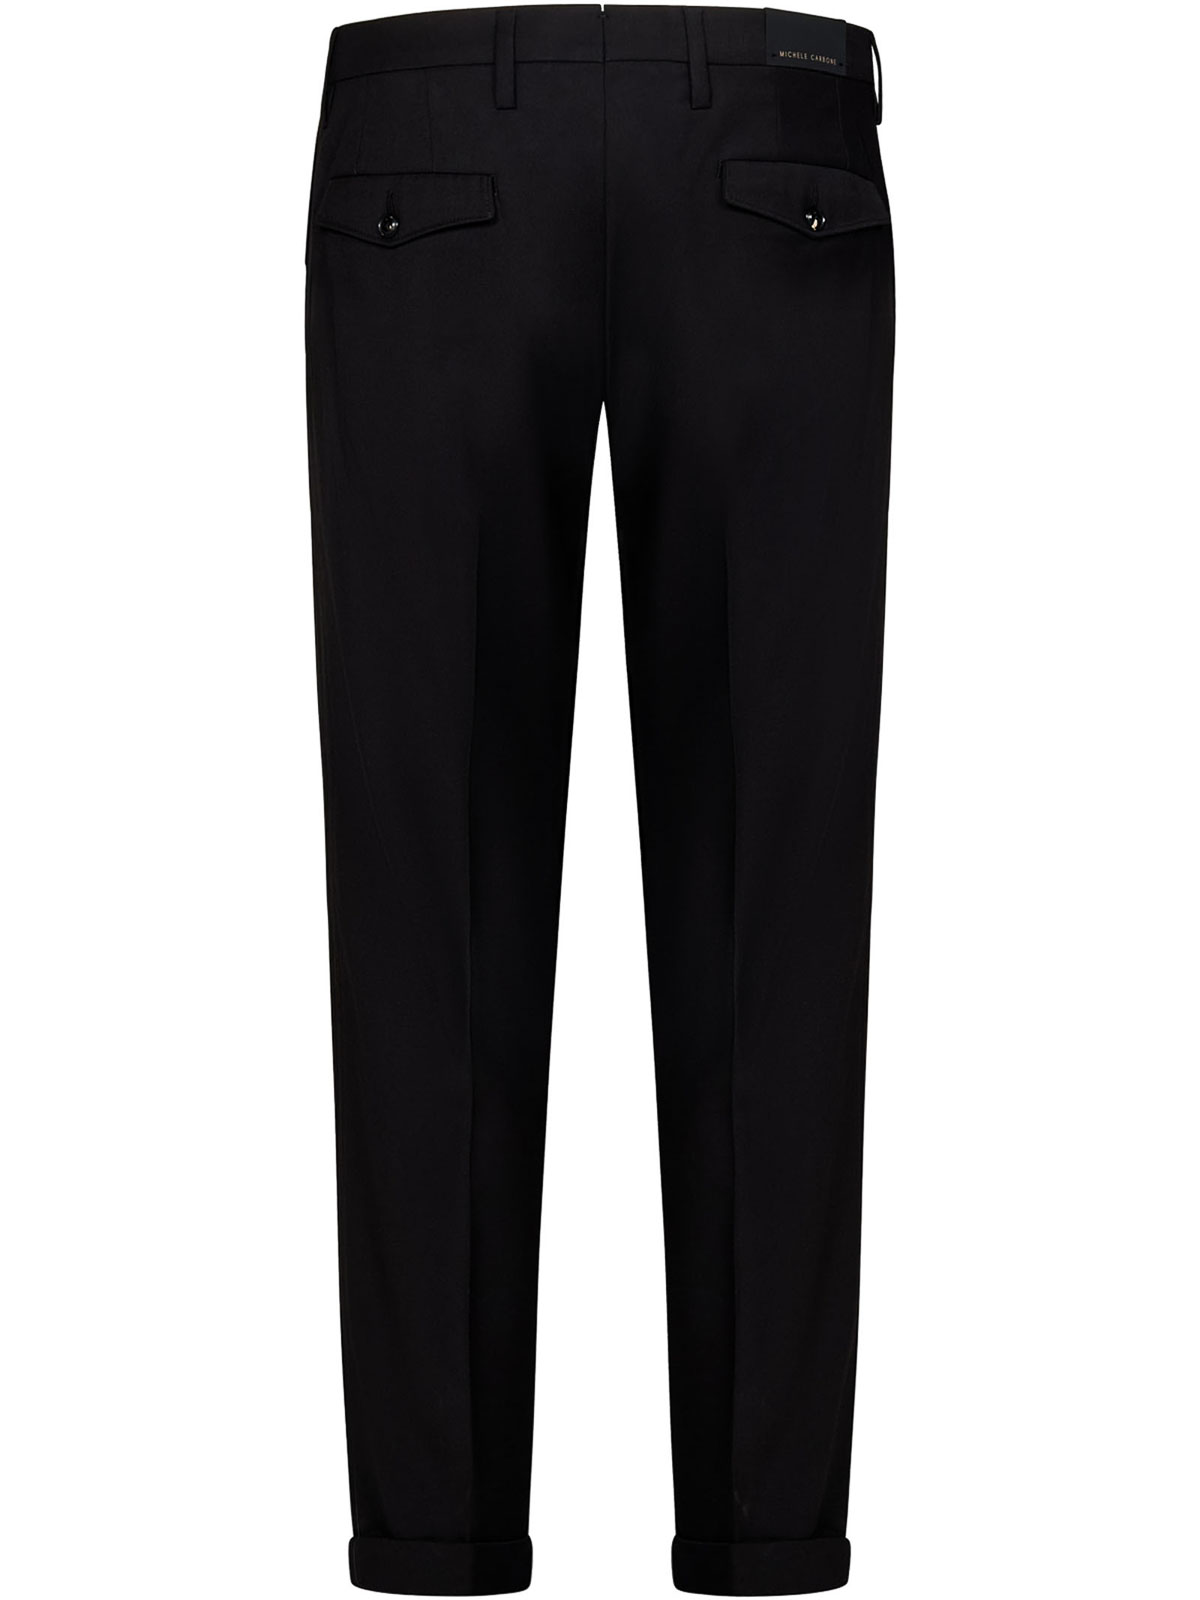 Shop Michele Carbone Black Tailored Trousers